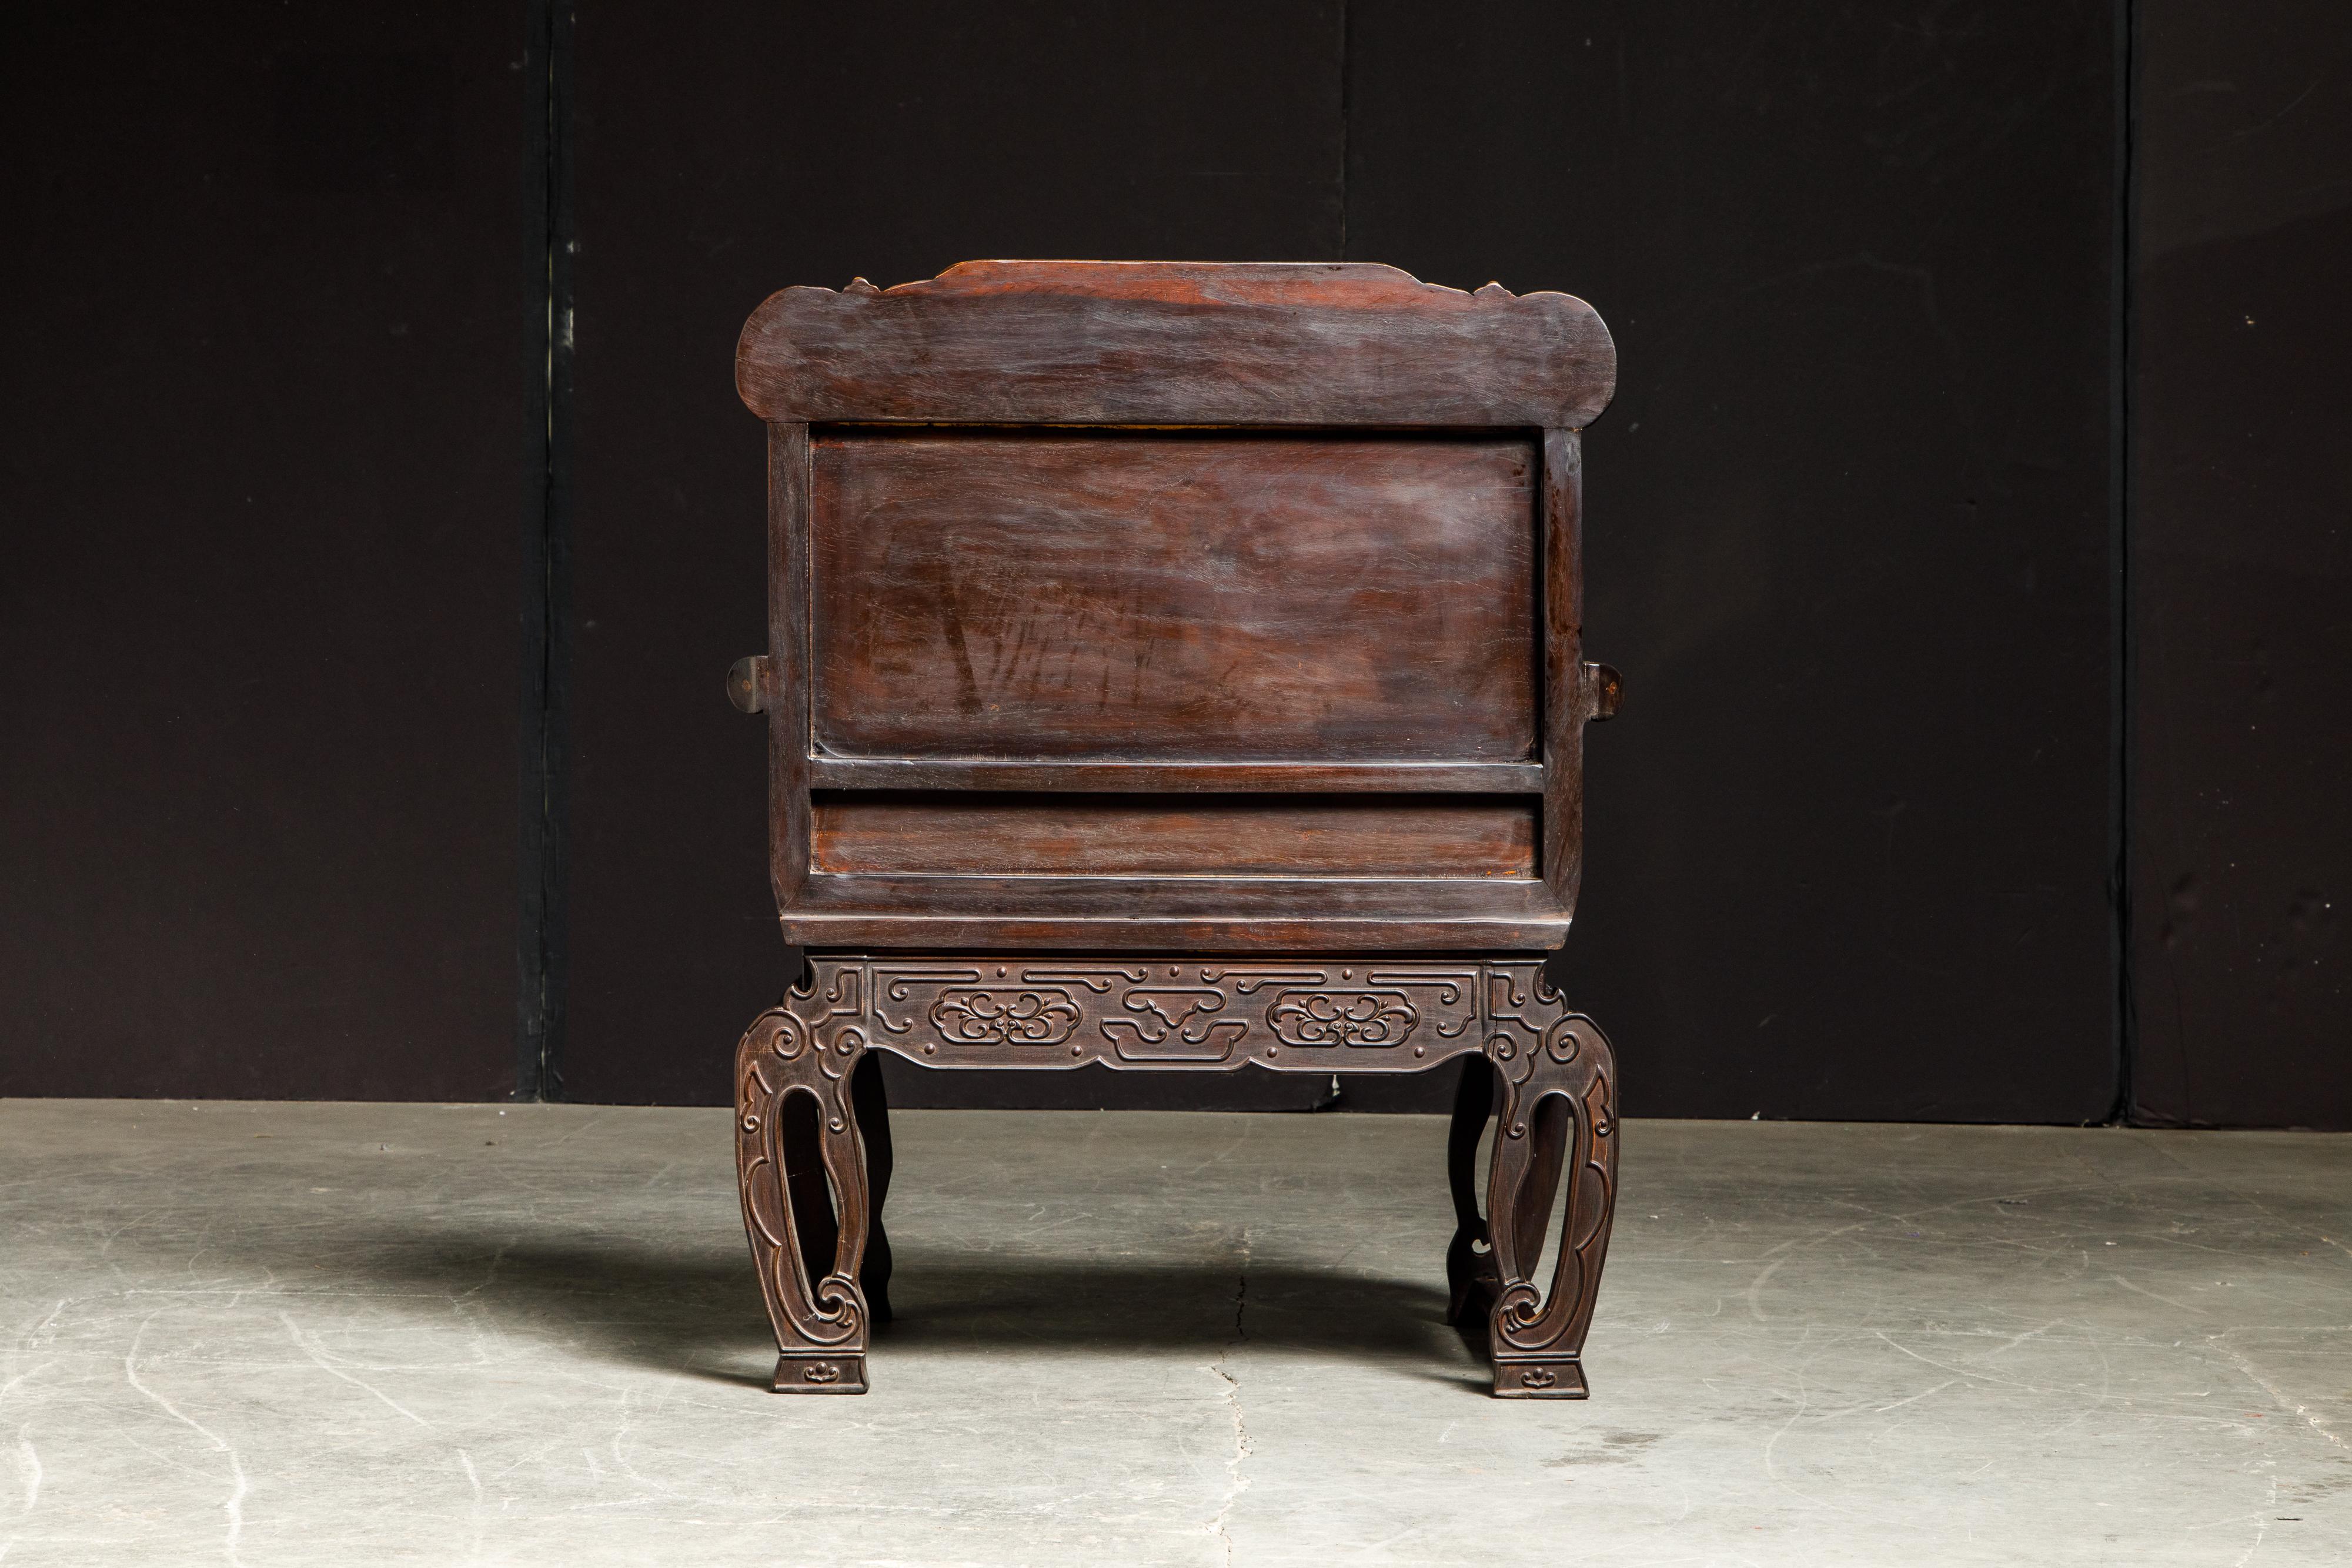 20th Century Pair of Carved Chinese Zitan Throne Chairs with Dragon Motifs